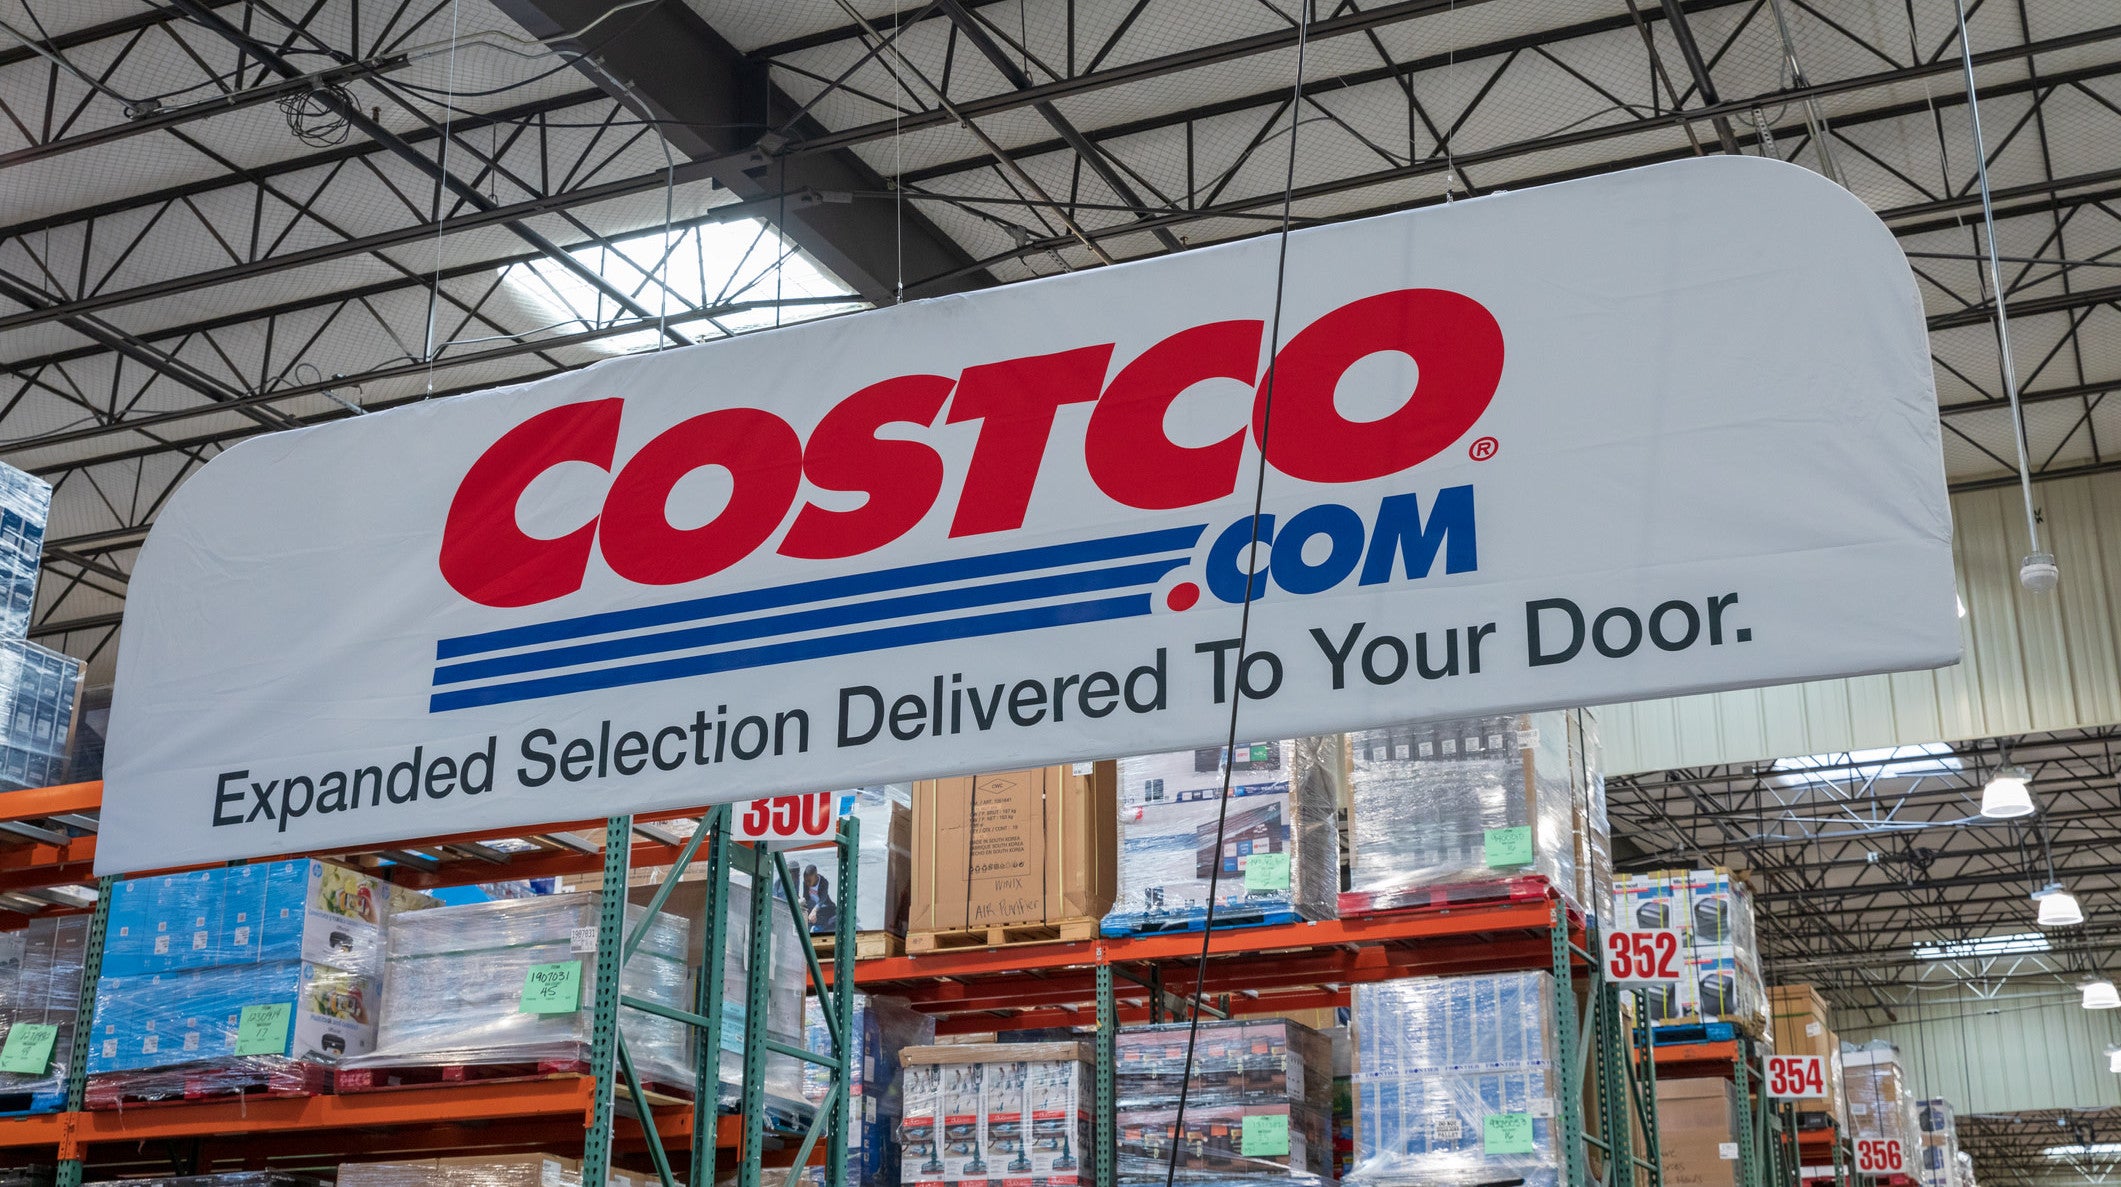 Who Even Shops On Costco’s Website.